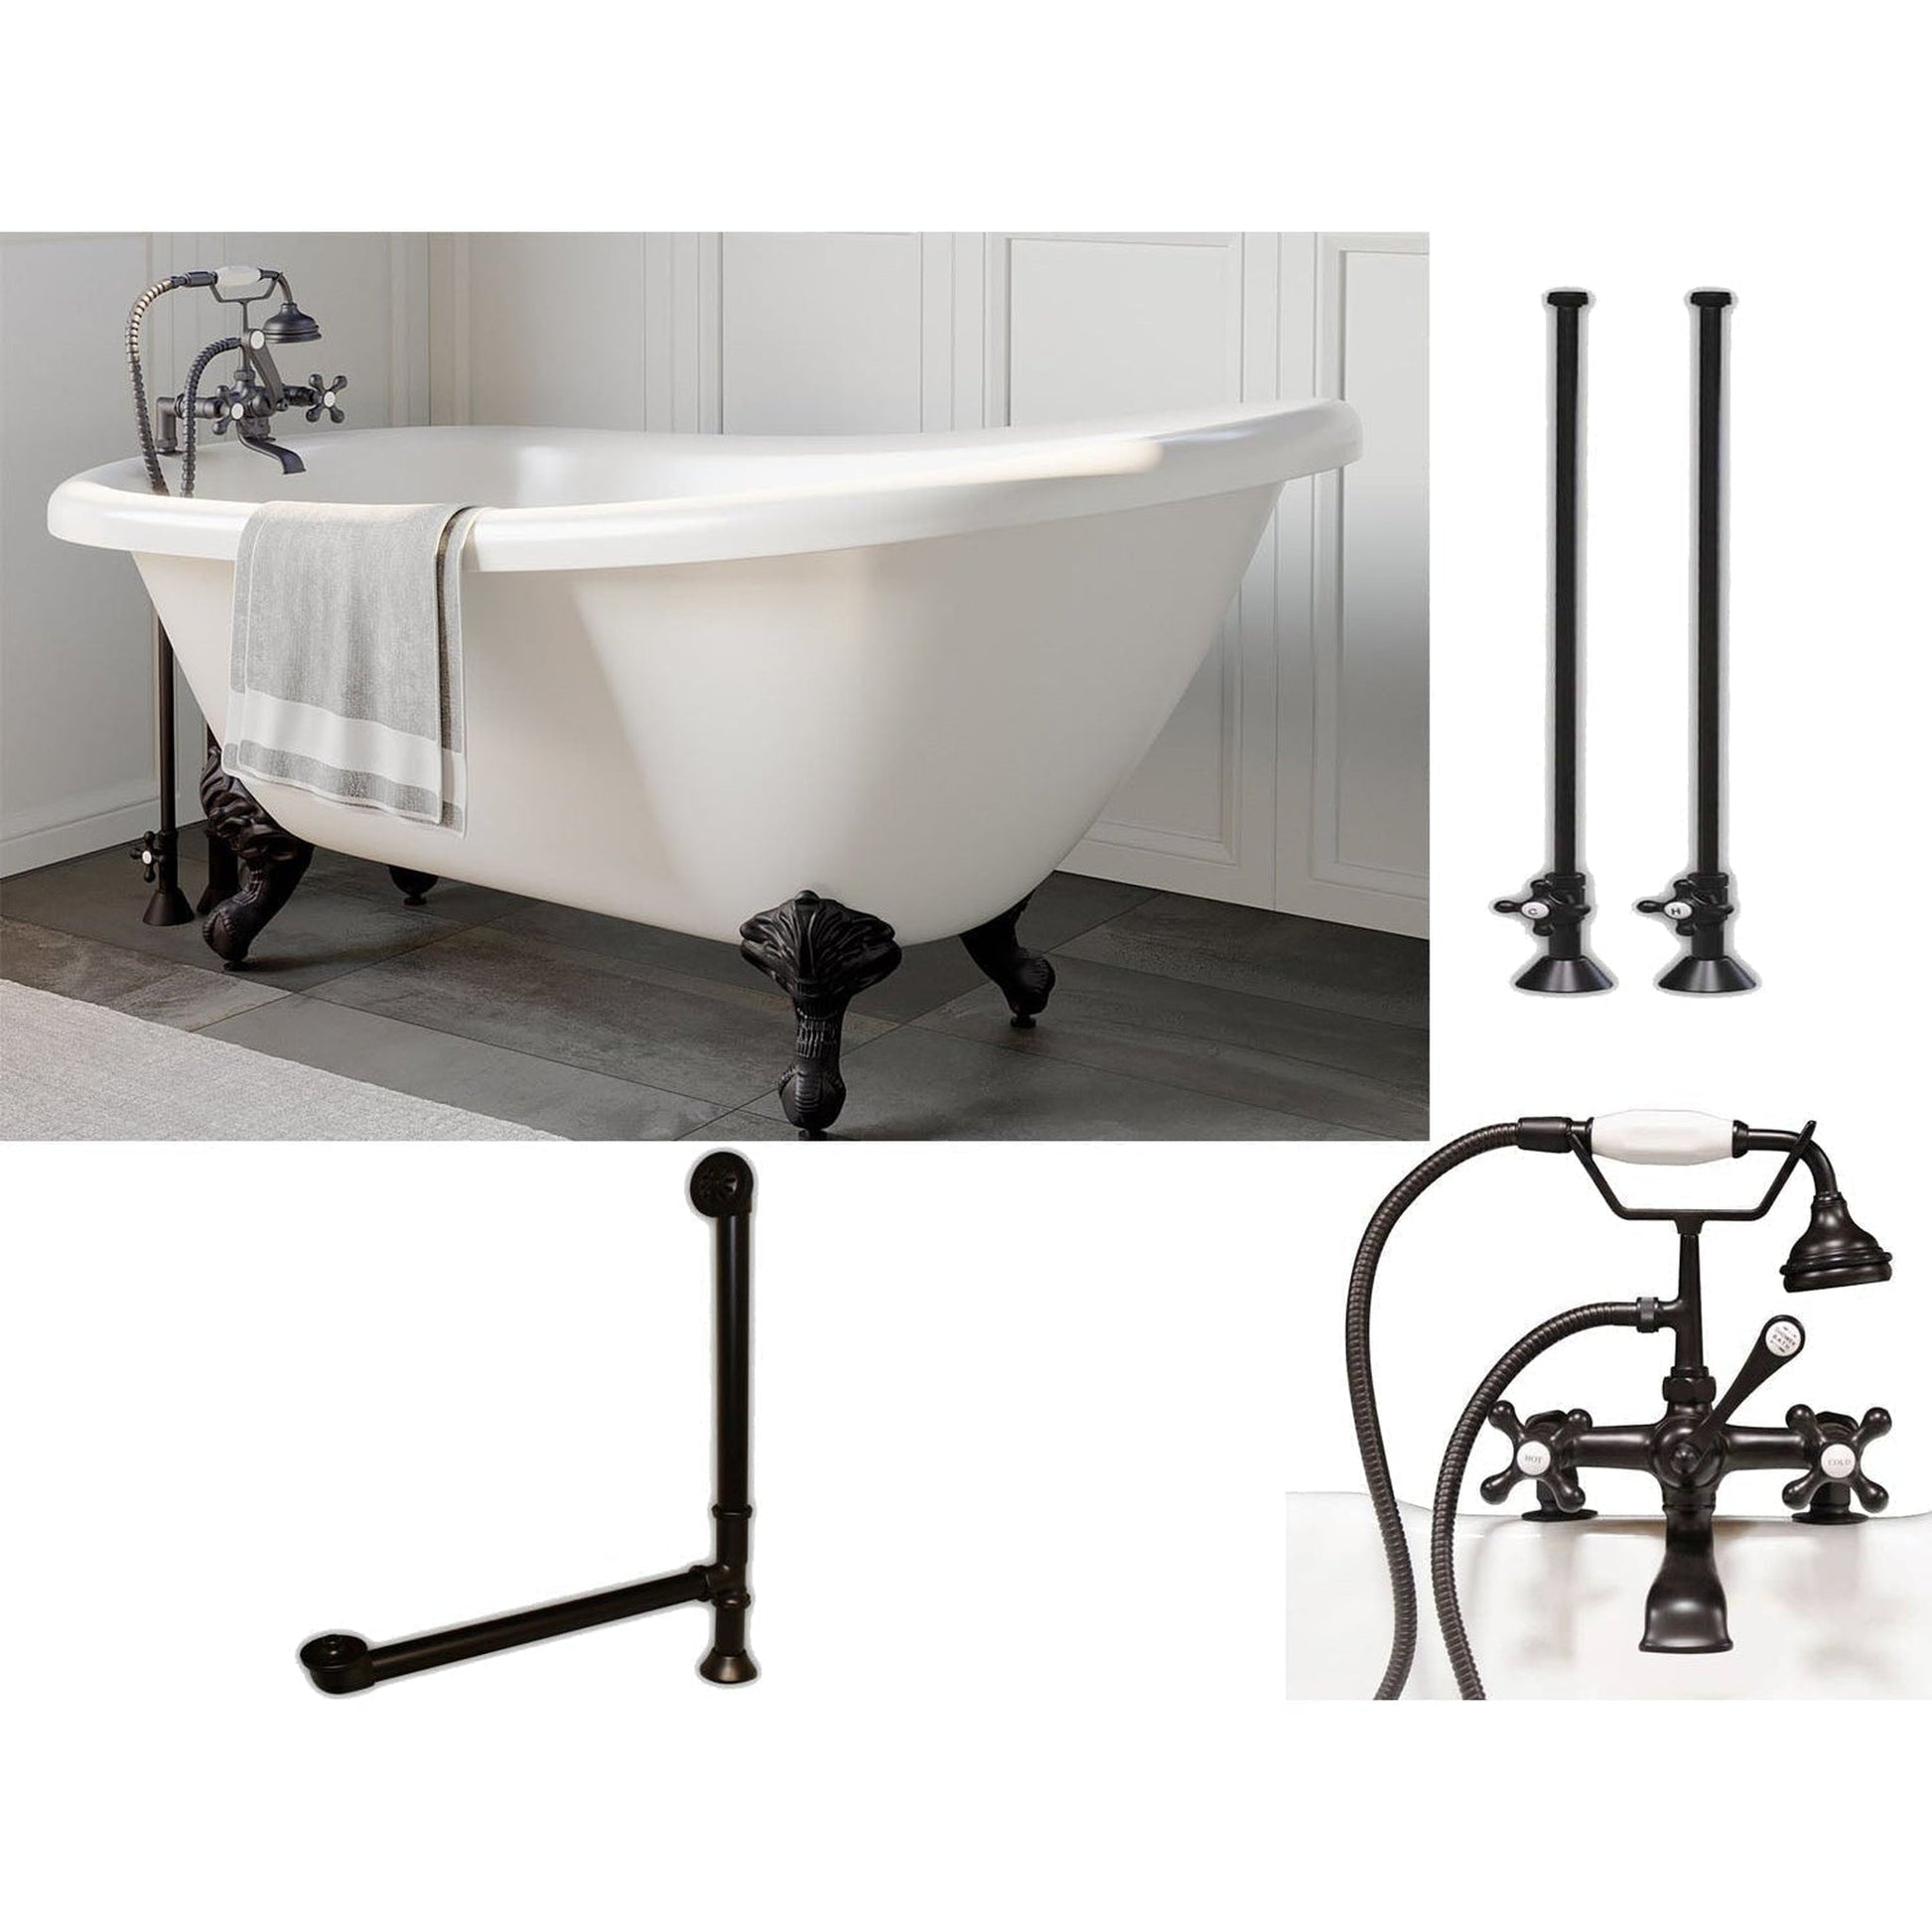 Cambridge Plumbing 67" White Acrylic Single Slipper Clawfoot Bathtub With Deck Holes And Complete Plumbing Package Including 2” Riser Deck Mount Faucet, Supply Lines, Drain And Overflow Assembly In Oil Rubbed Bronze